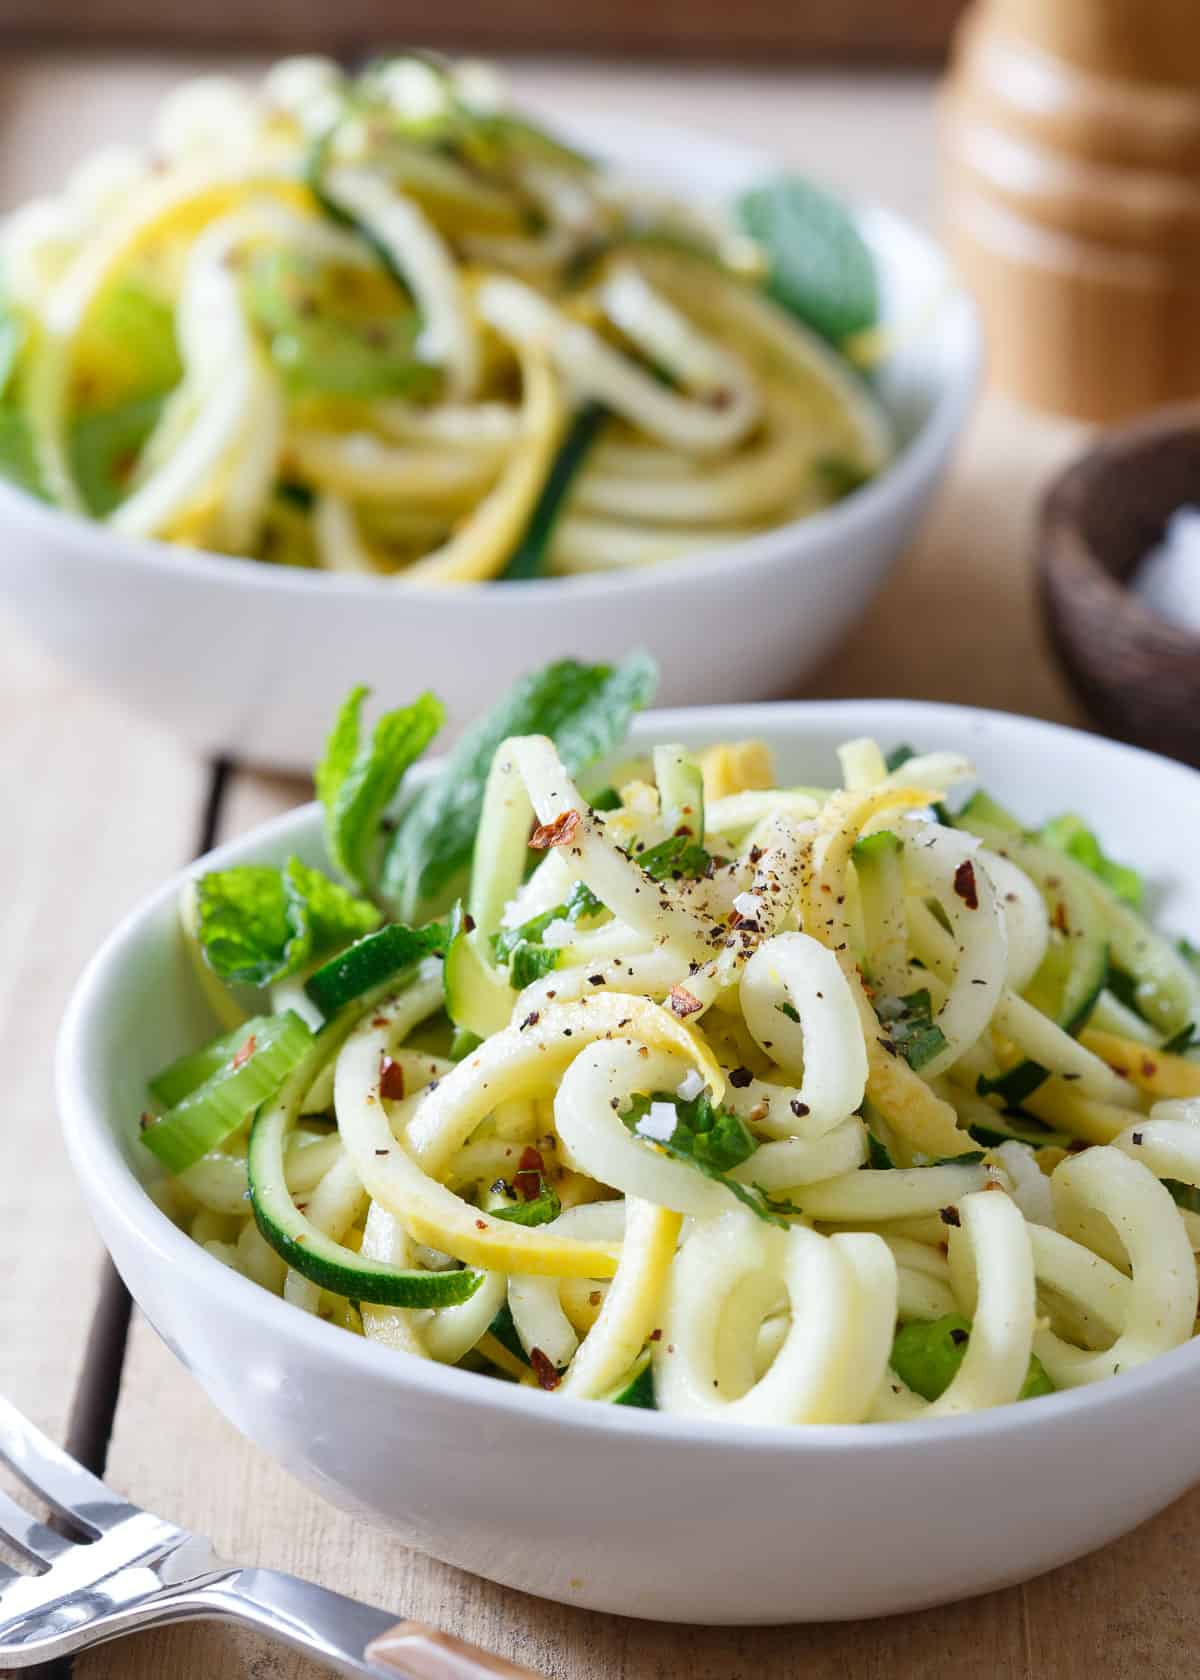 Basil and Mint Squash Noodles are a summertime staple full of flavor and fiber without any grains.